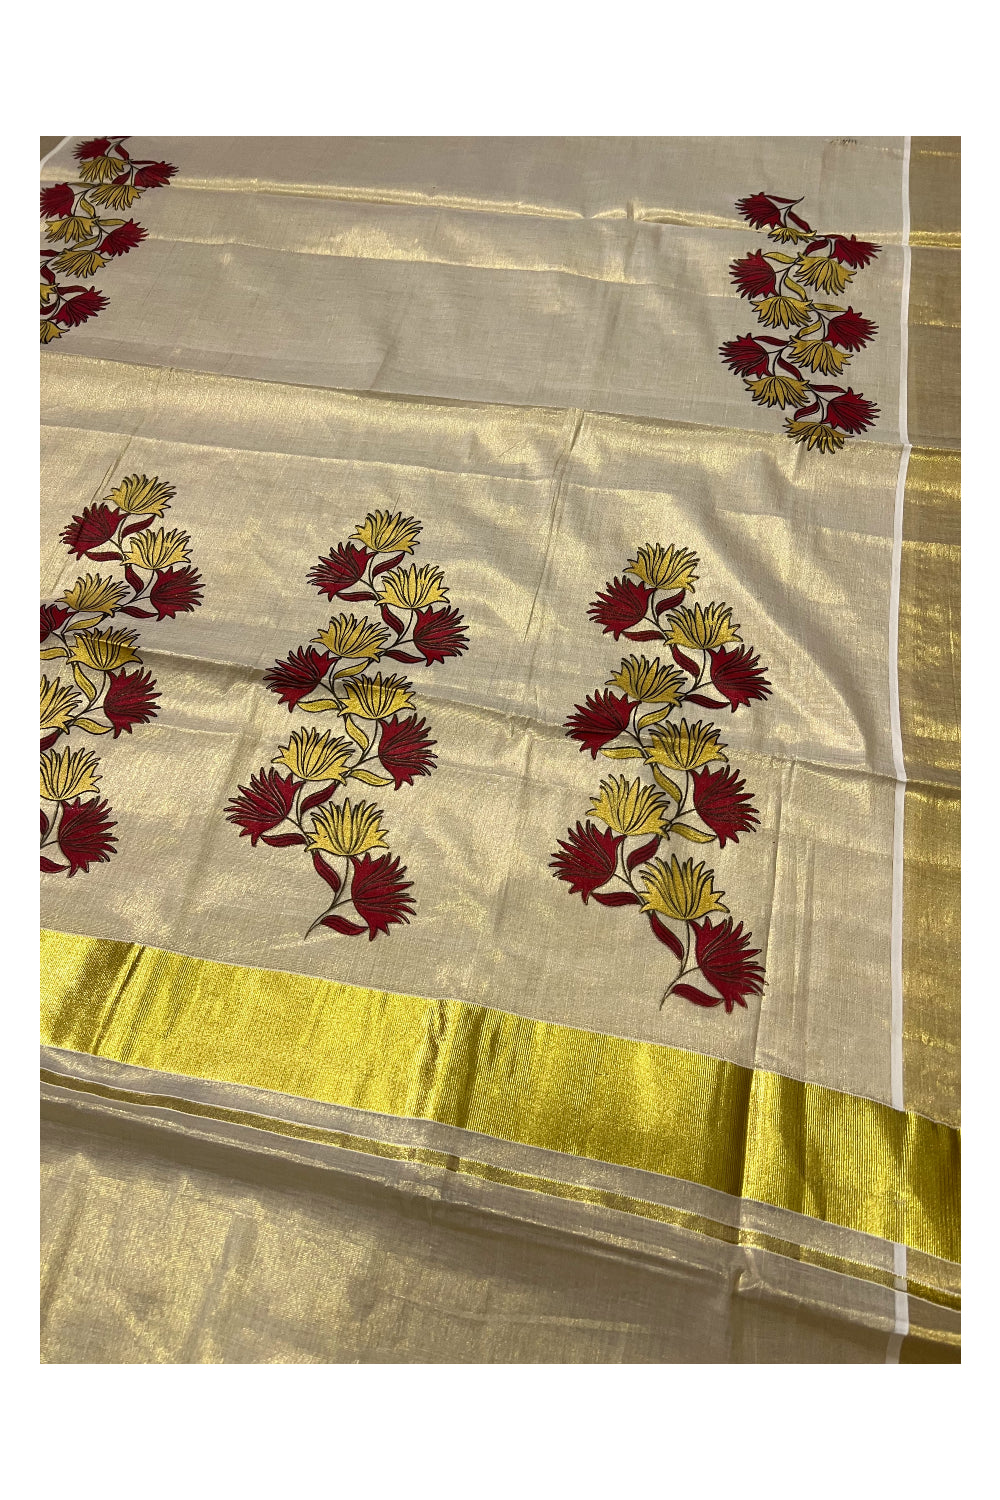 Kerala Tissue Kasavu Saree With Mural Printed Red and Yellow Floral Design